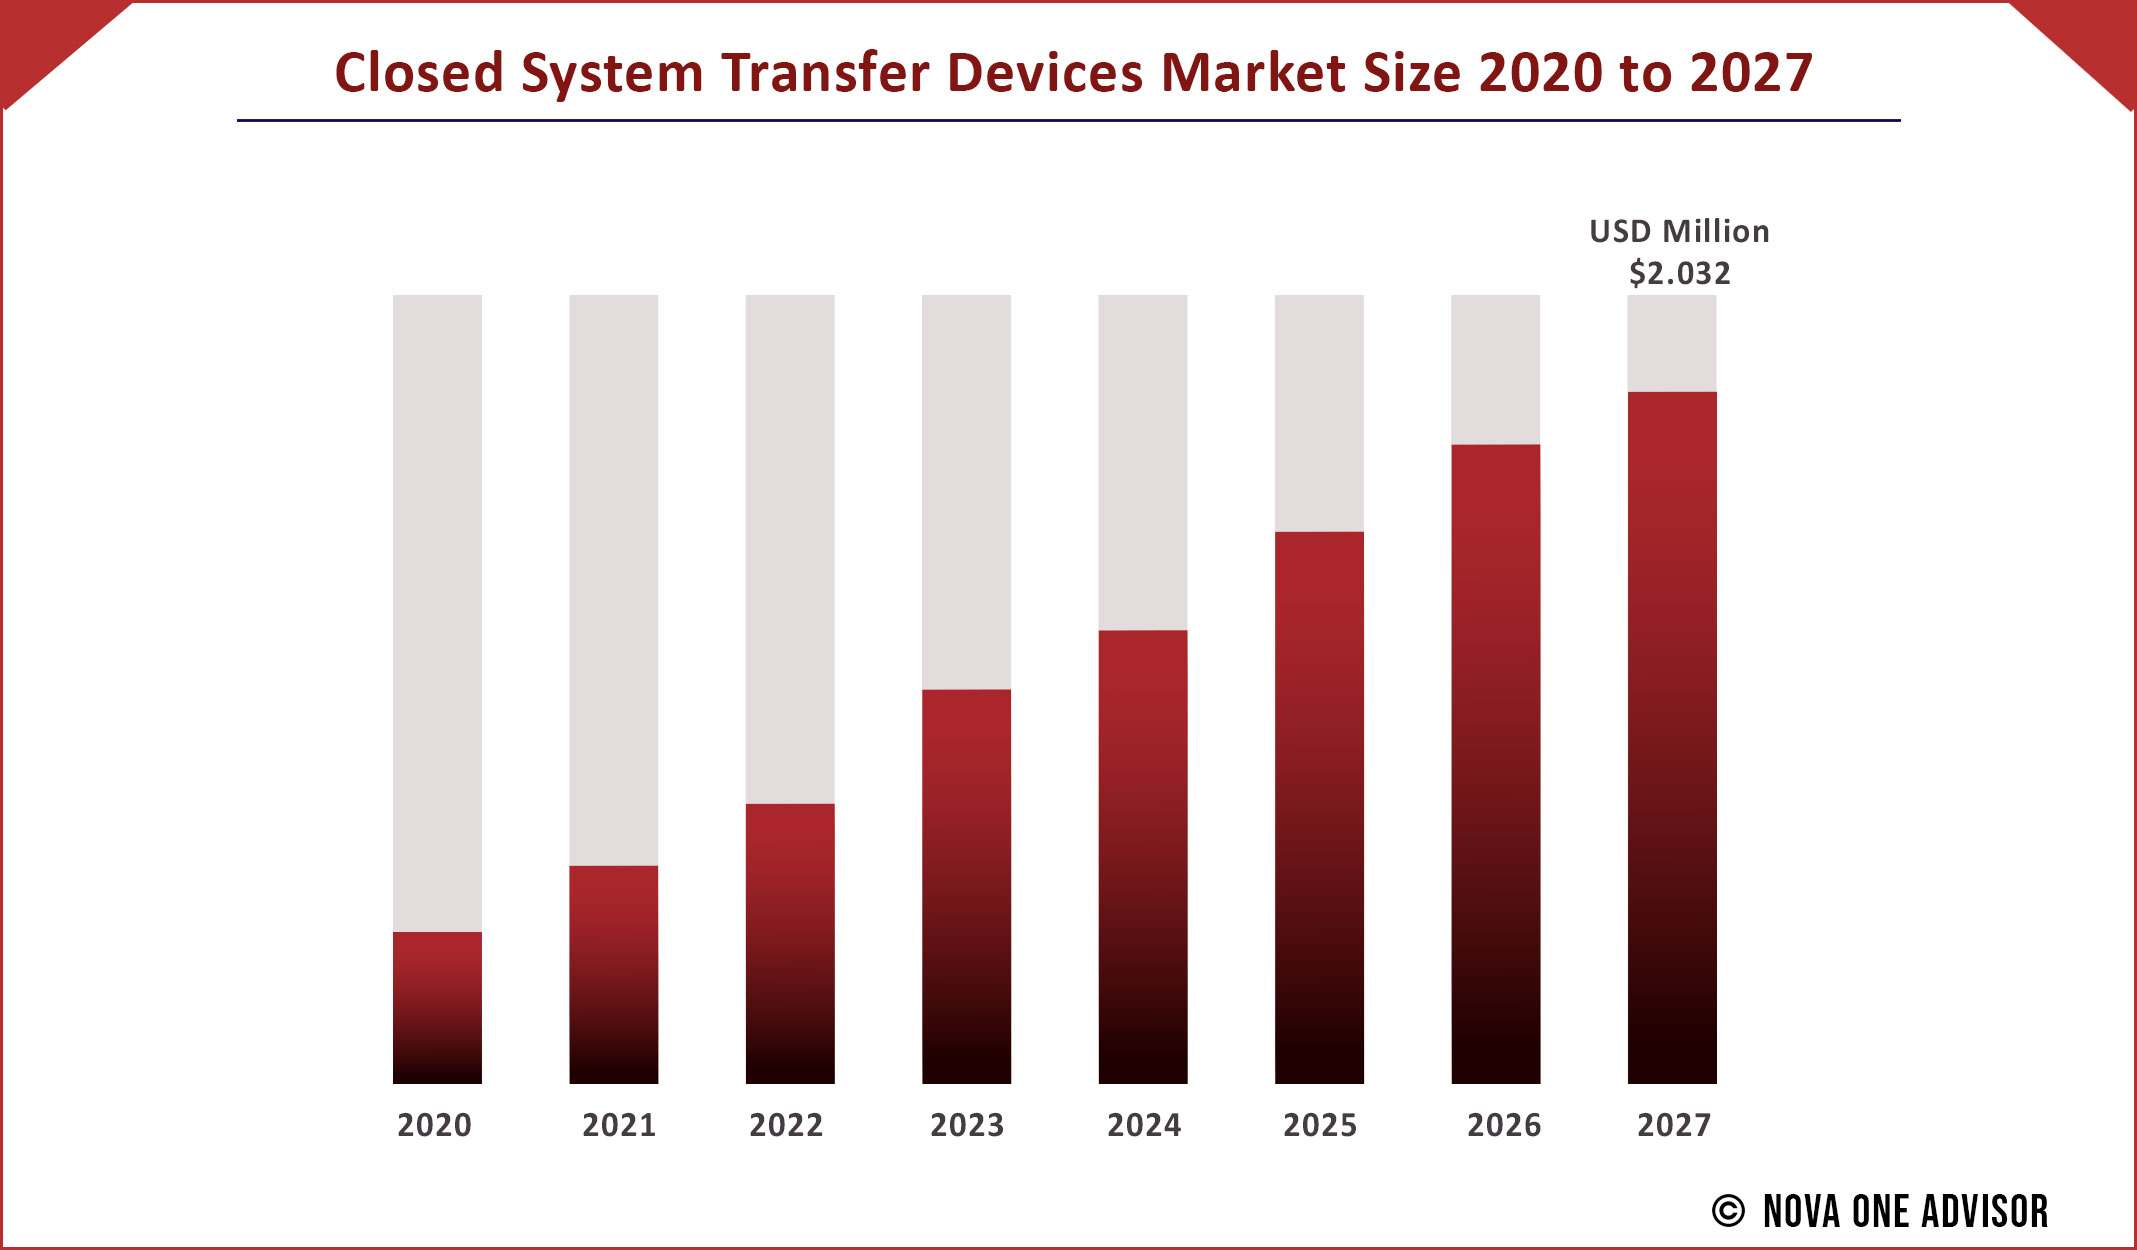 Closed System Transfer Devices Market Size 2020 to 2027